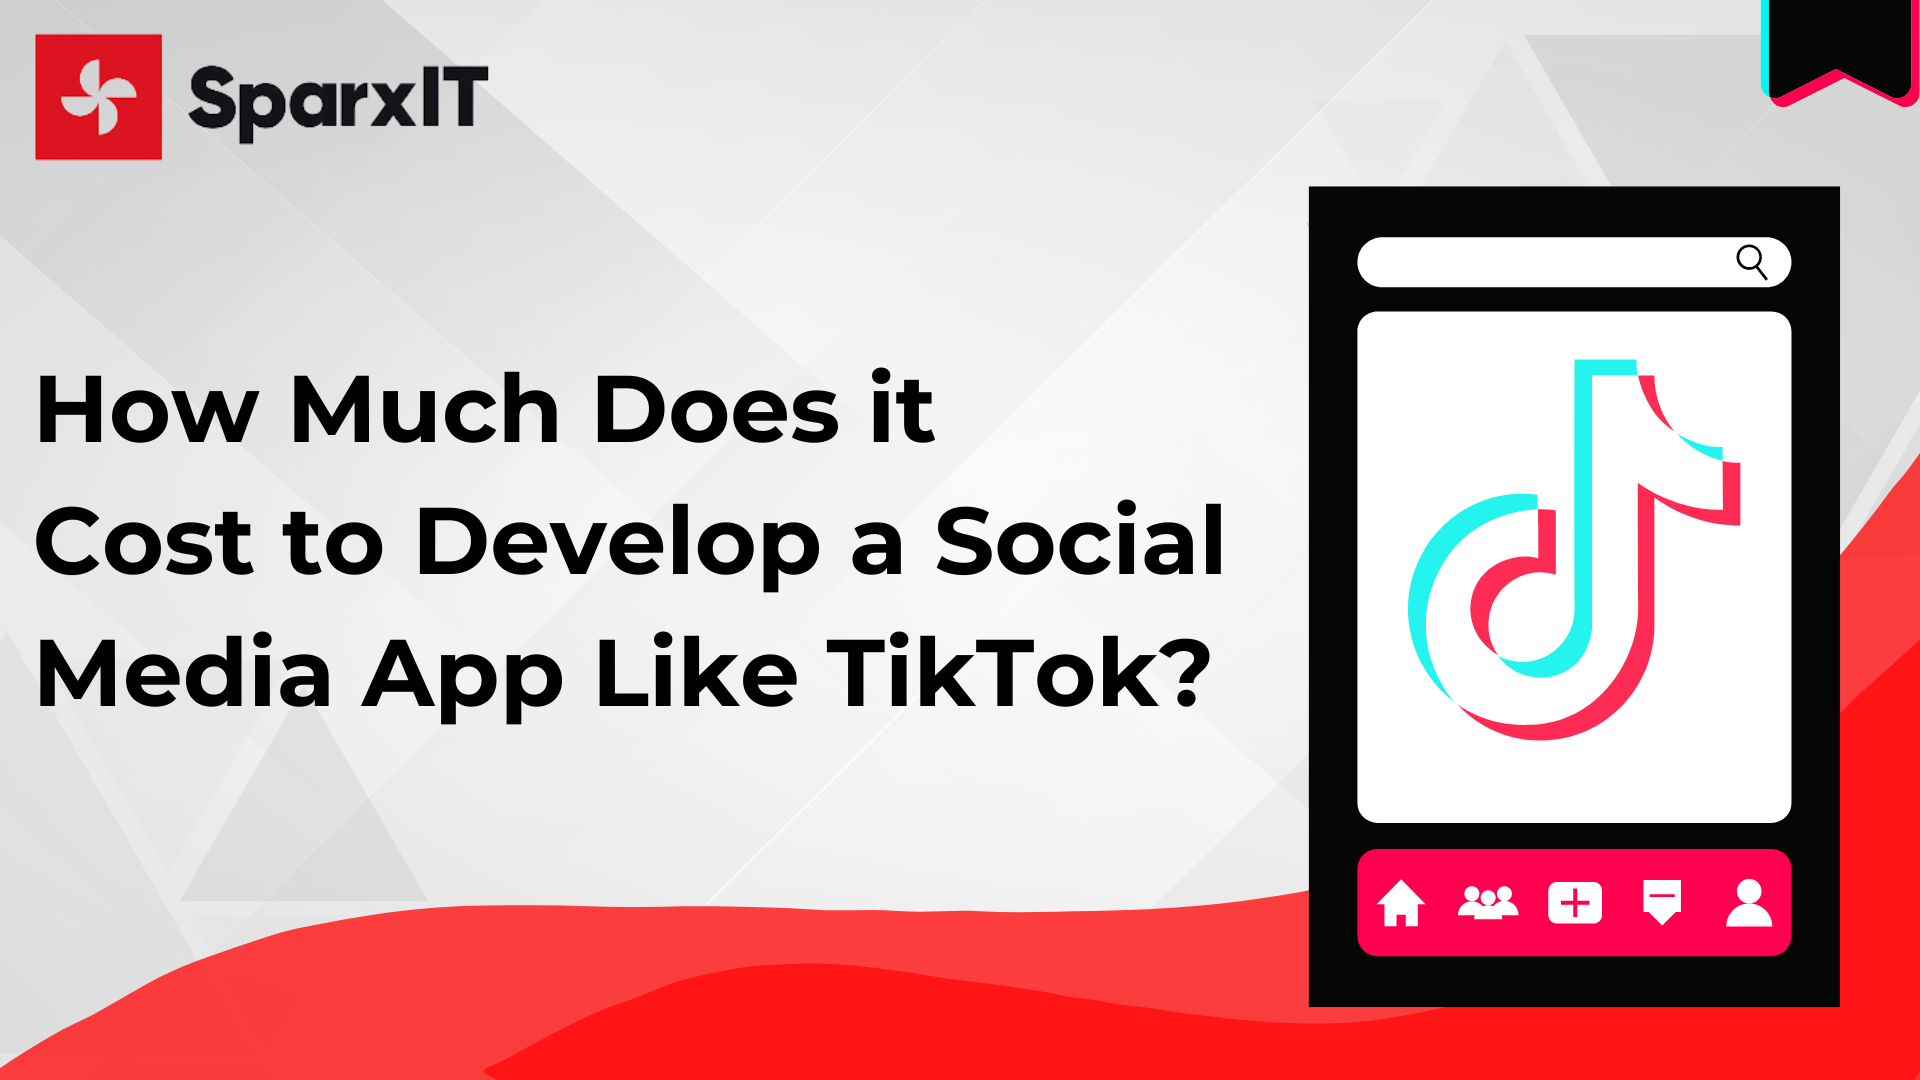 How Much Does it Cost to Develop a Social Media App Like TikTok?